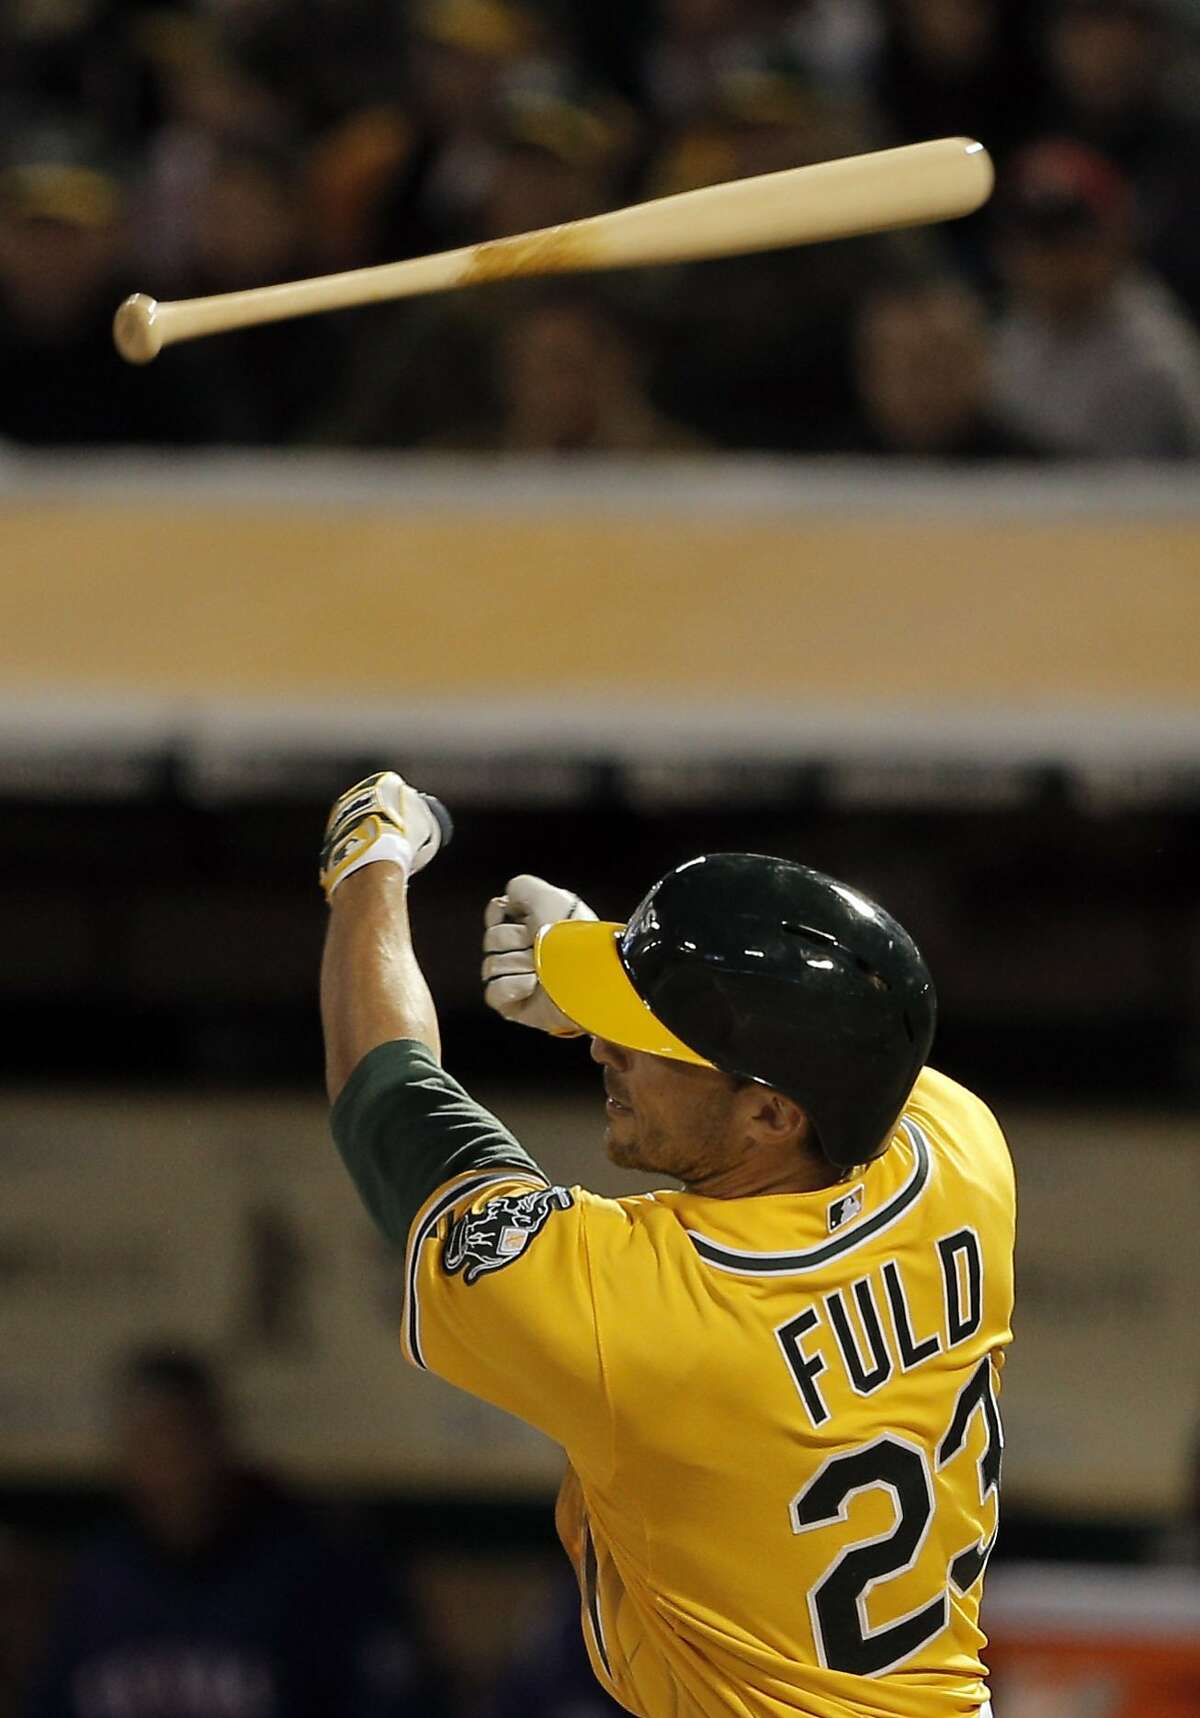 Sam Fuld (23) loses the grip on his bat in the third inning as the Oakland Athletics played the Texas Rangers at O.Co Coliseum on Tuesday, April 7, 2015, in Oakland, Calif.